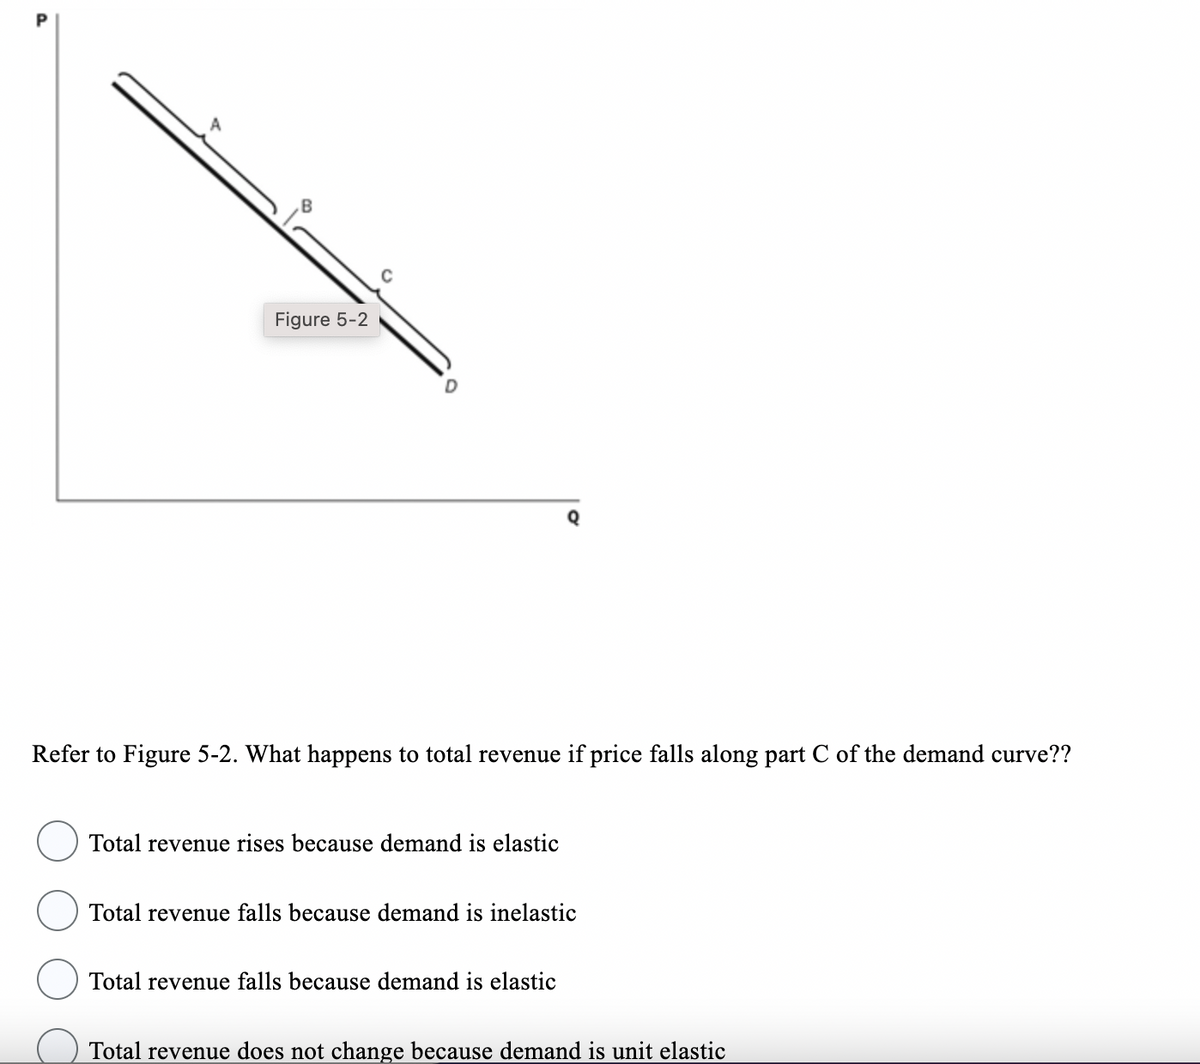 Figure 5-2
Refer to Figure 5-2. What happens to total revenue if price falls along part C of the demand curve??
Total revenue rises because demand is elastic
Total revenue falls because demand is inelastic
Total revenue falls because demand is elastic
Total revenue does not change because demand is unit elastic